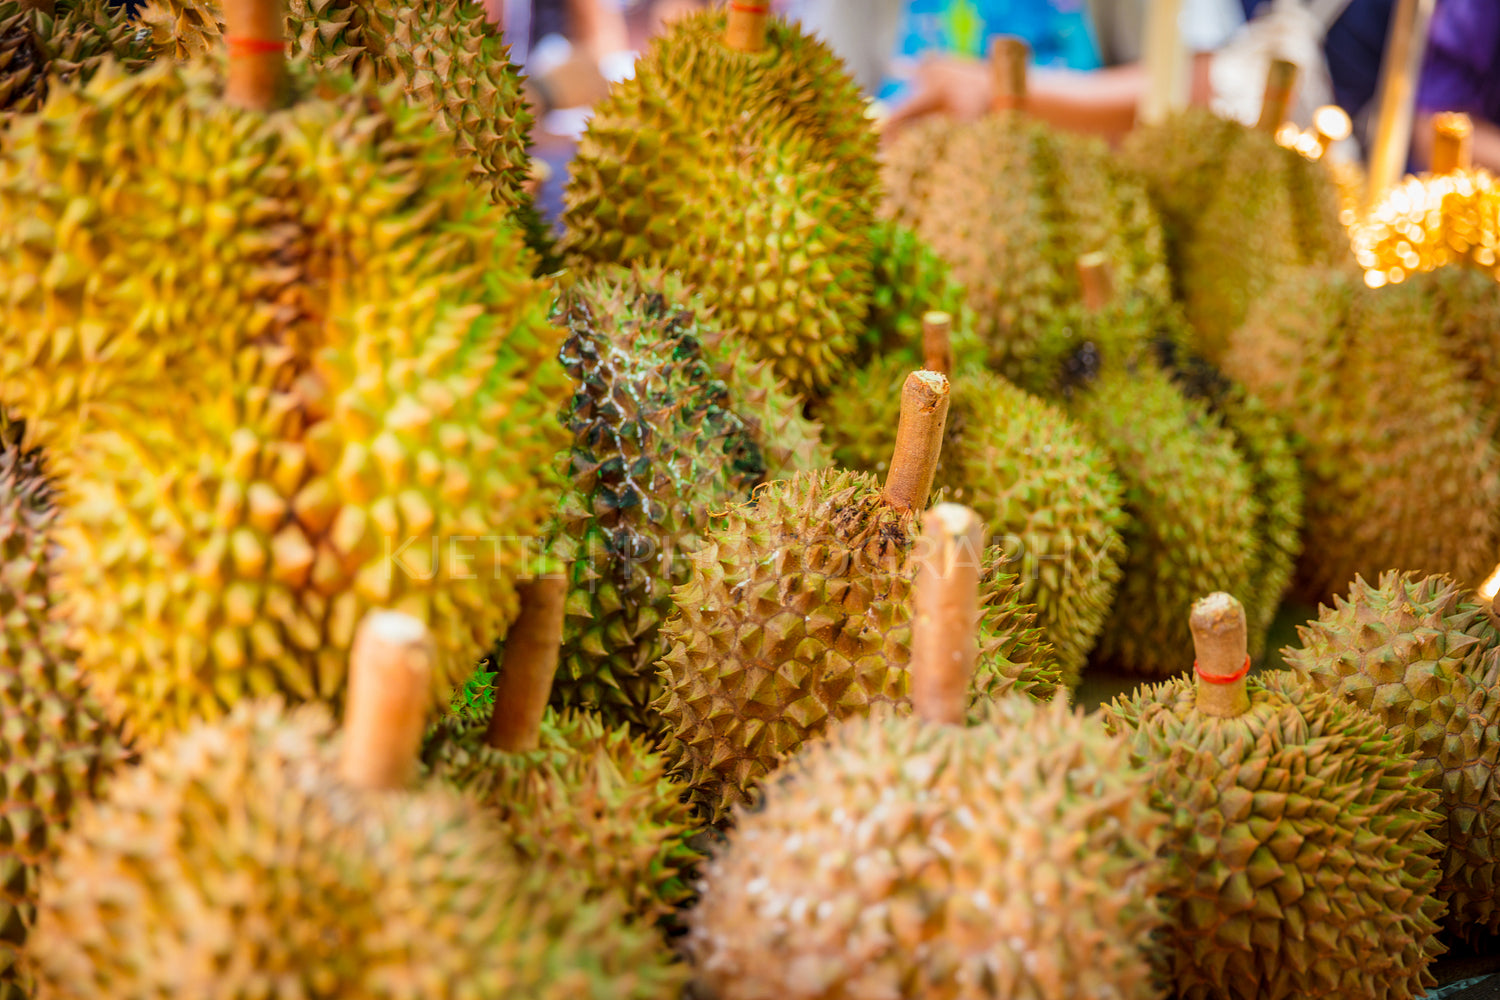 Durian Fruits For Sale On Market Stall